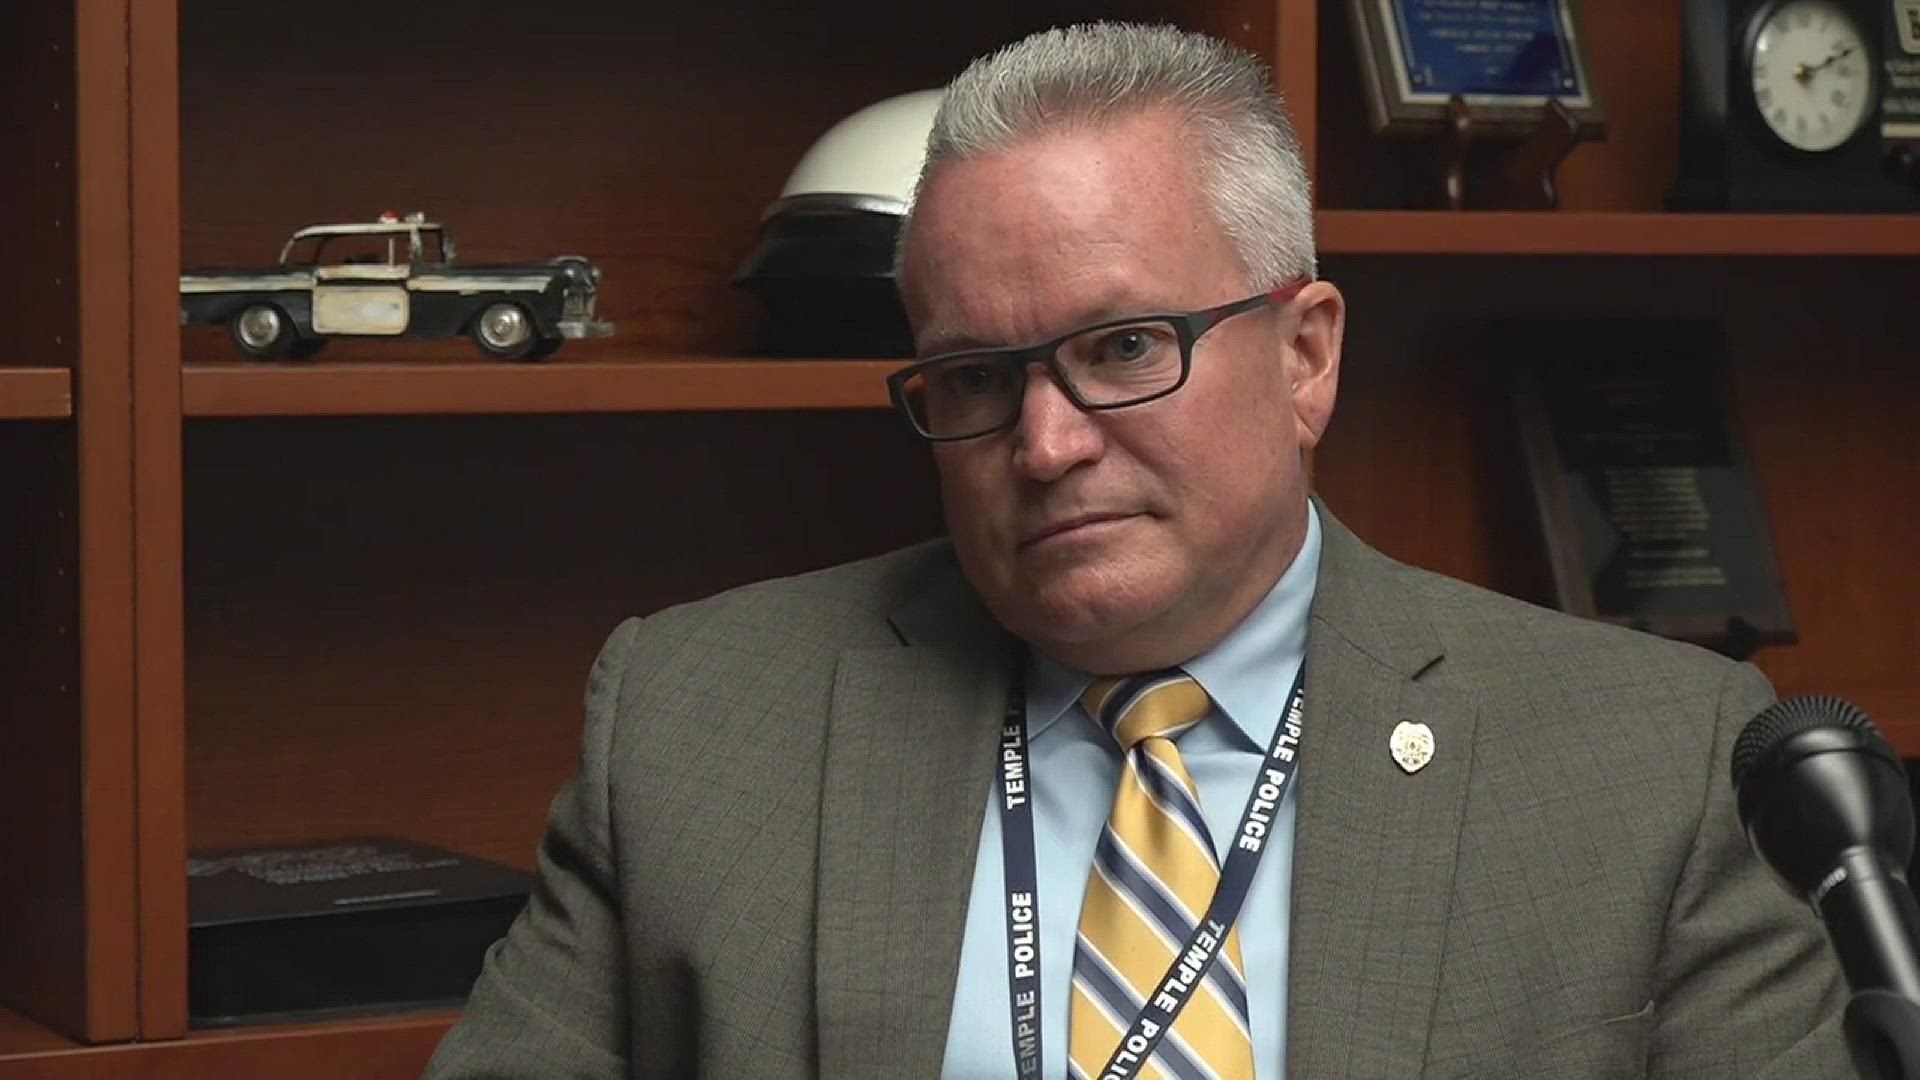 6 News sat down for a one-on-one interview with Temple's new police chief